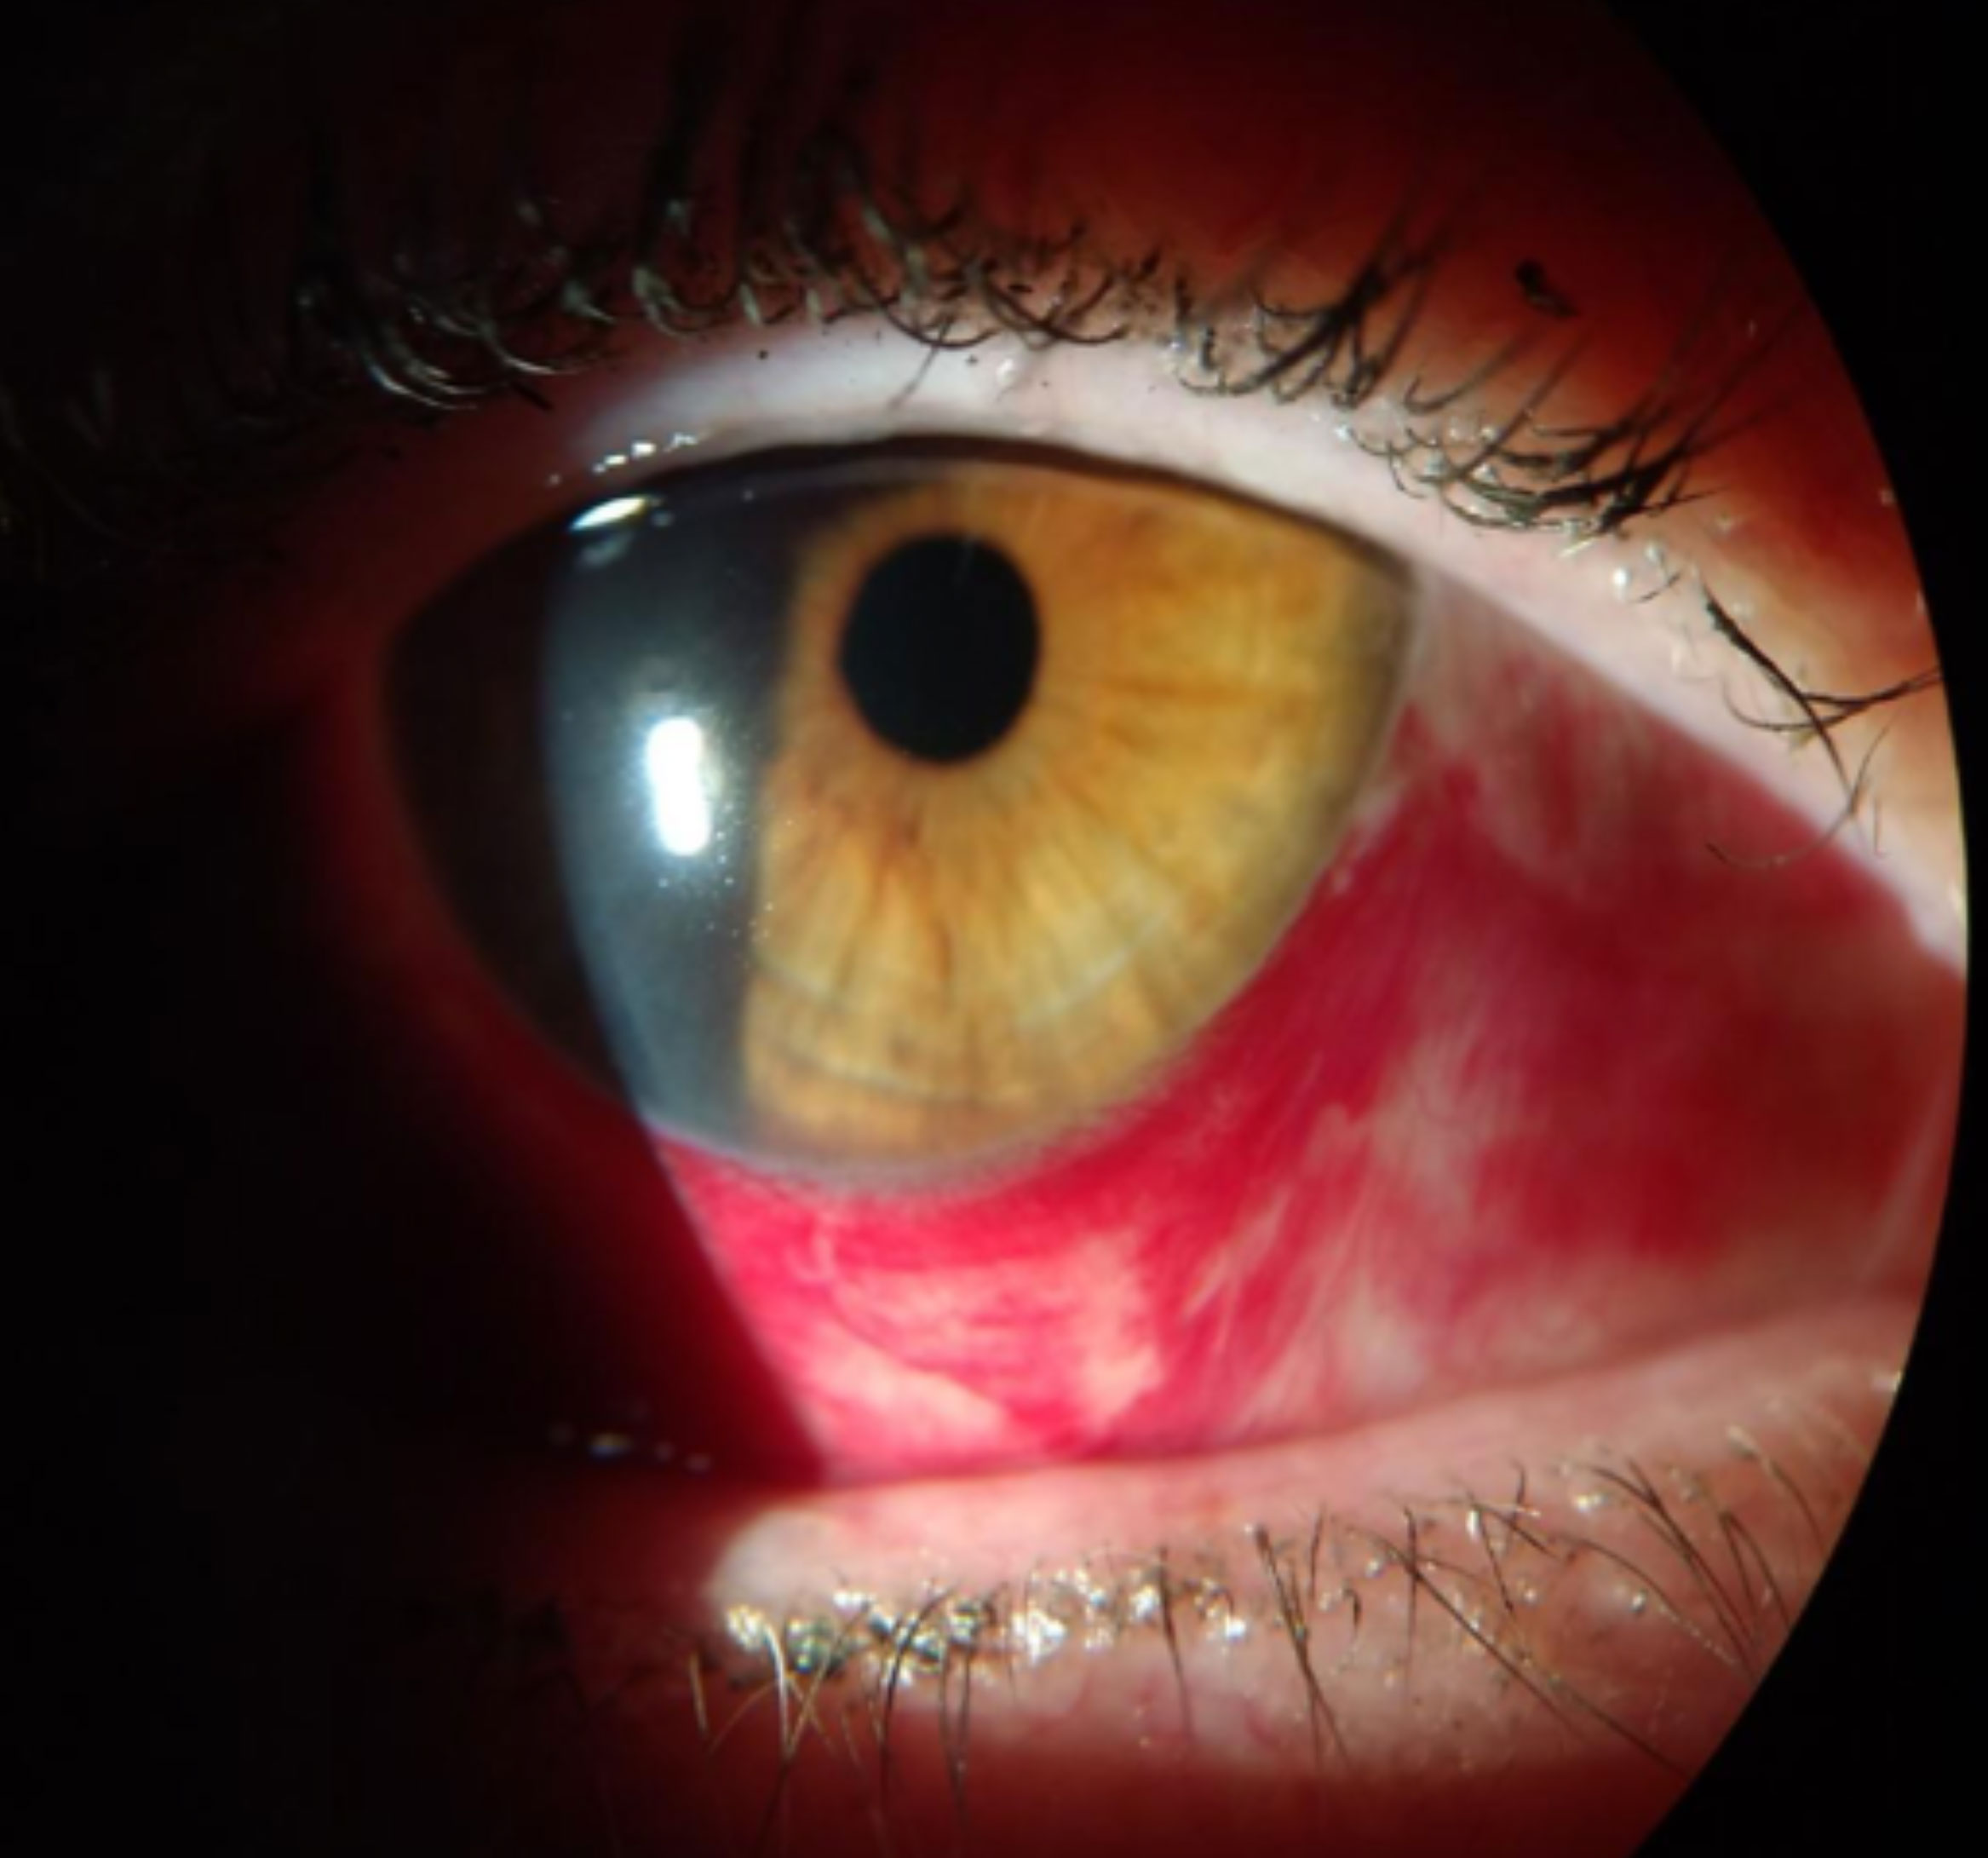 Redness associated with a subconjunctival hemorrhage.